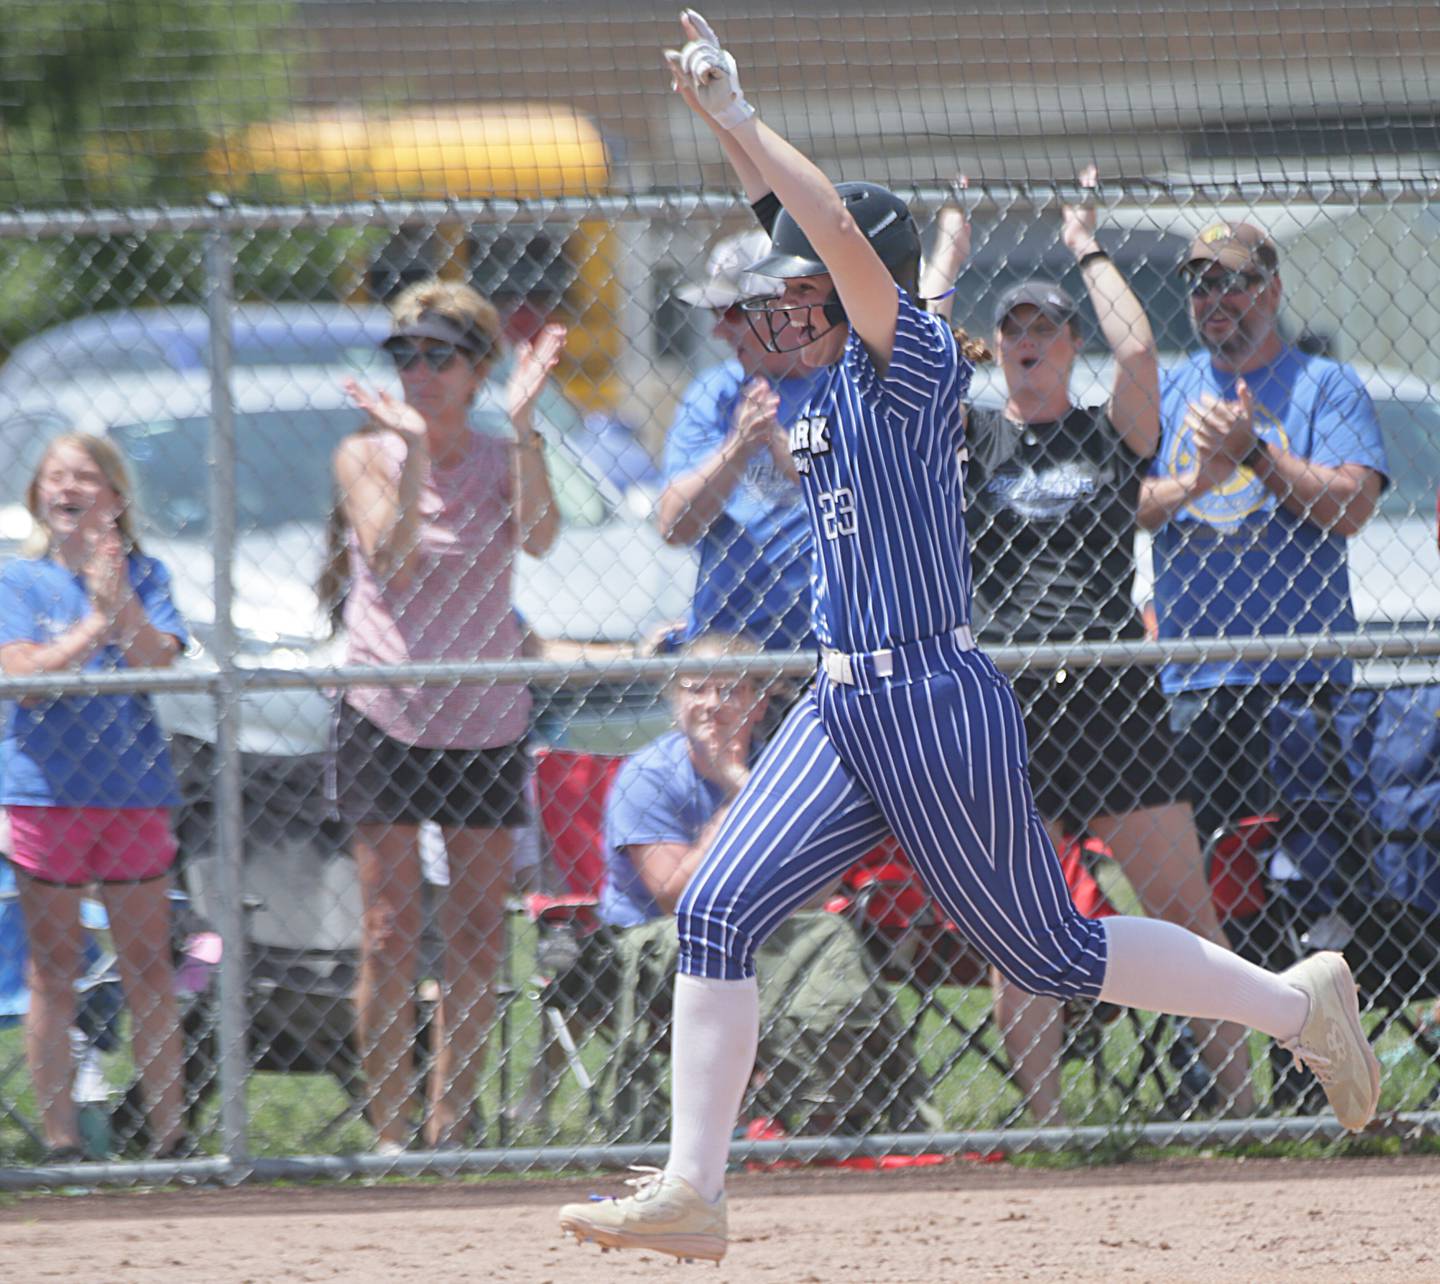 Newark's KJ Friestad reacts while running to home plate after hitting a home run against Flanagan/Woodland-Cornell in the Class 1A Sectional title game on Saturday, May 28, 2022 in Dwight.